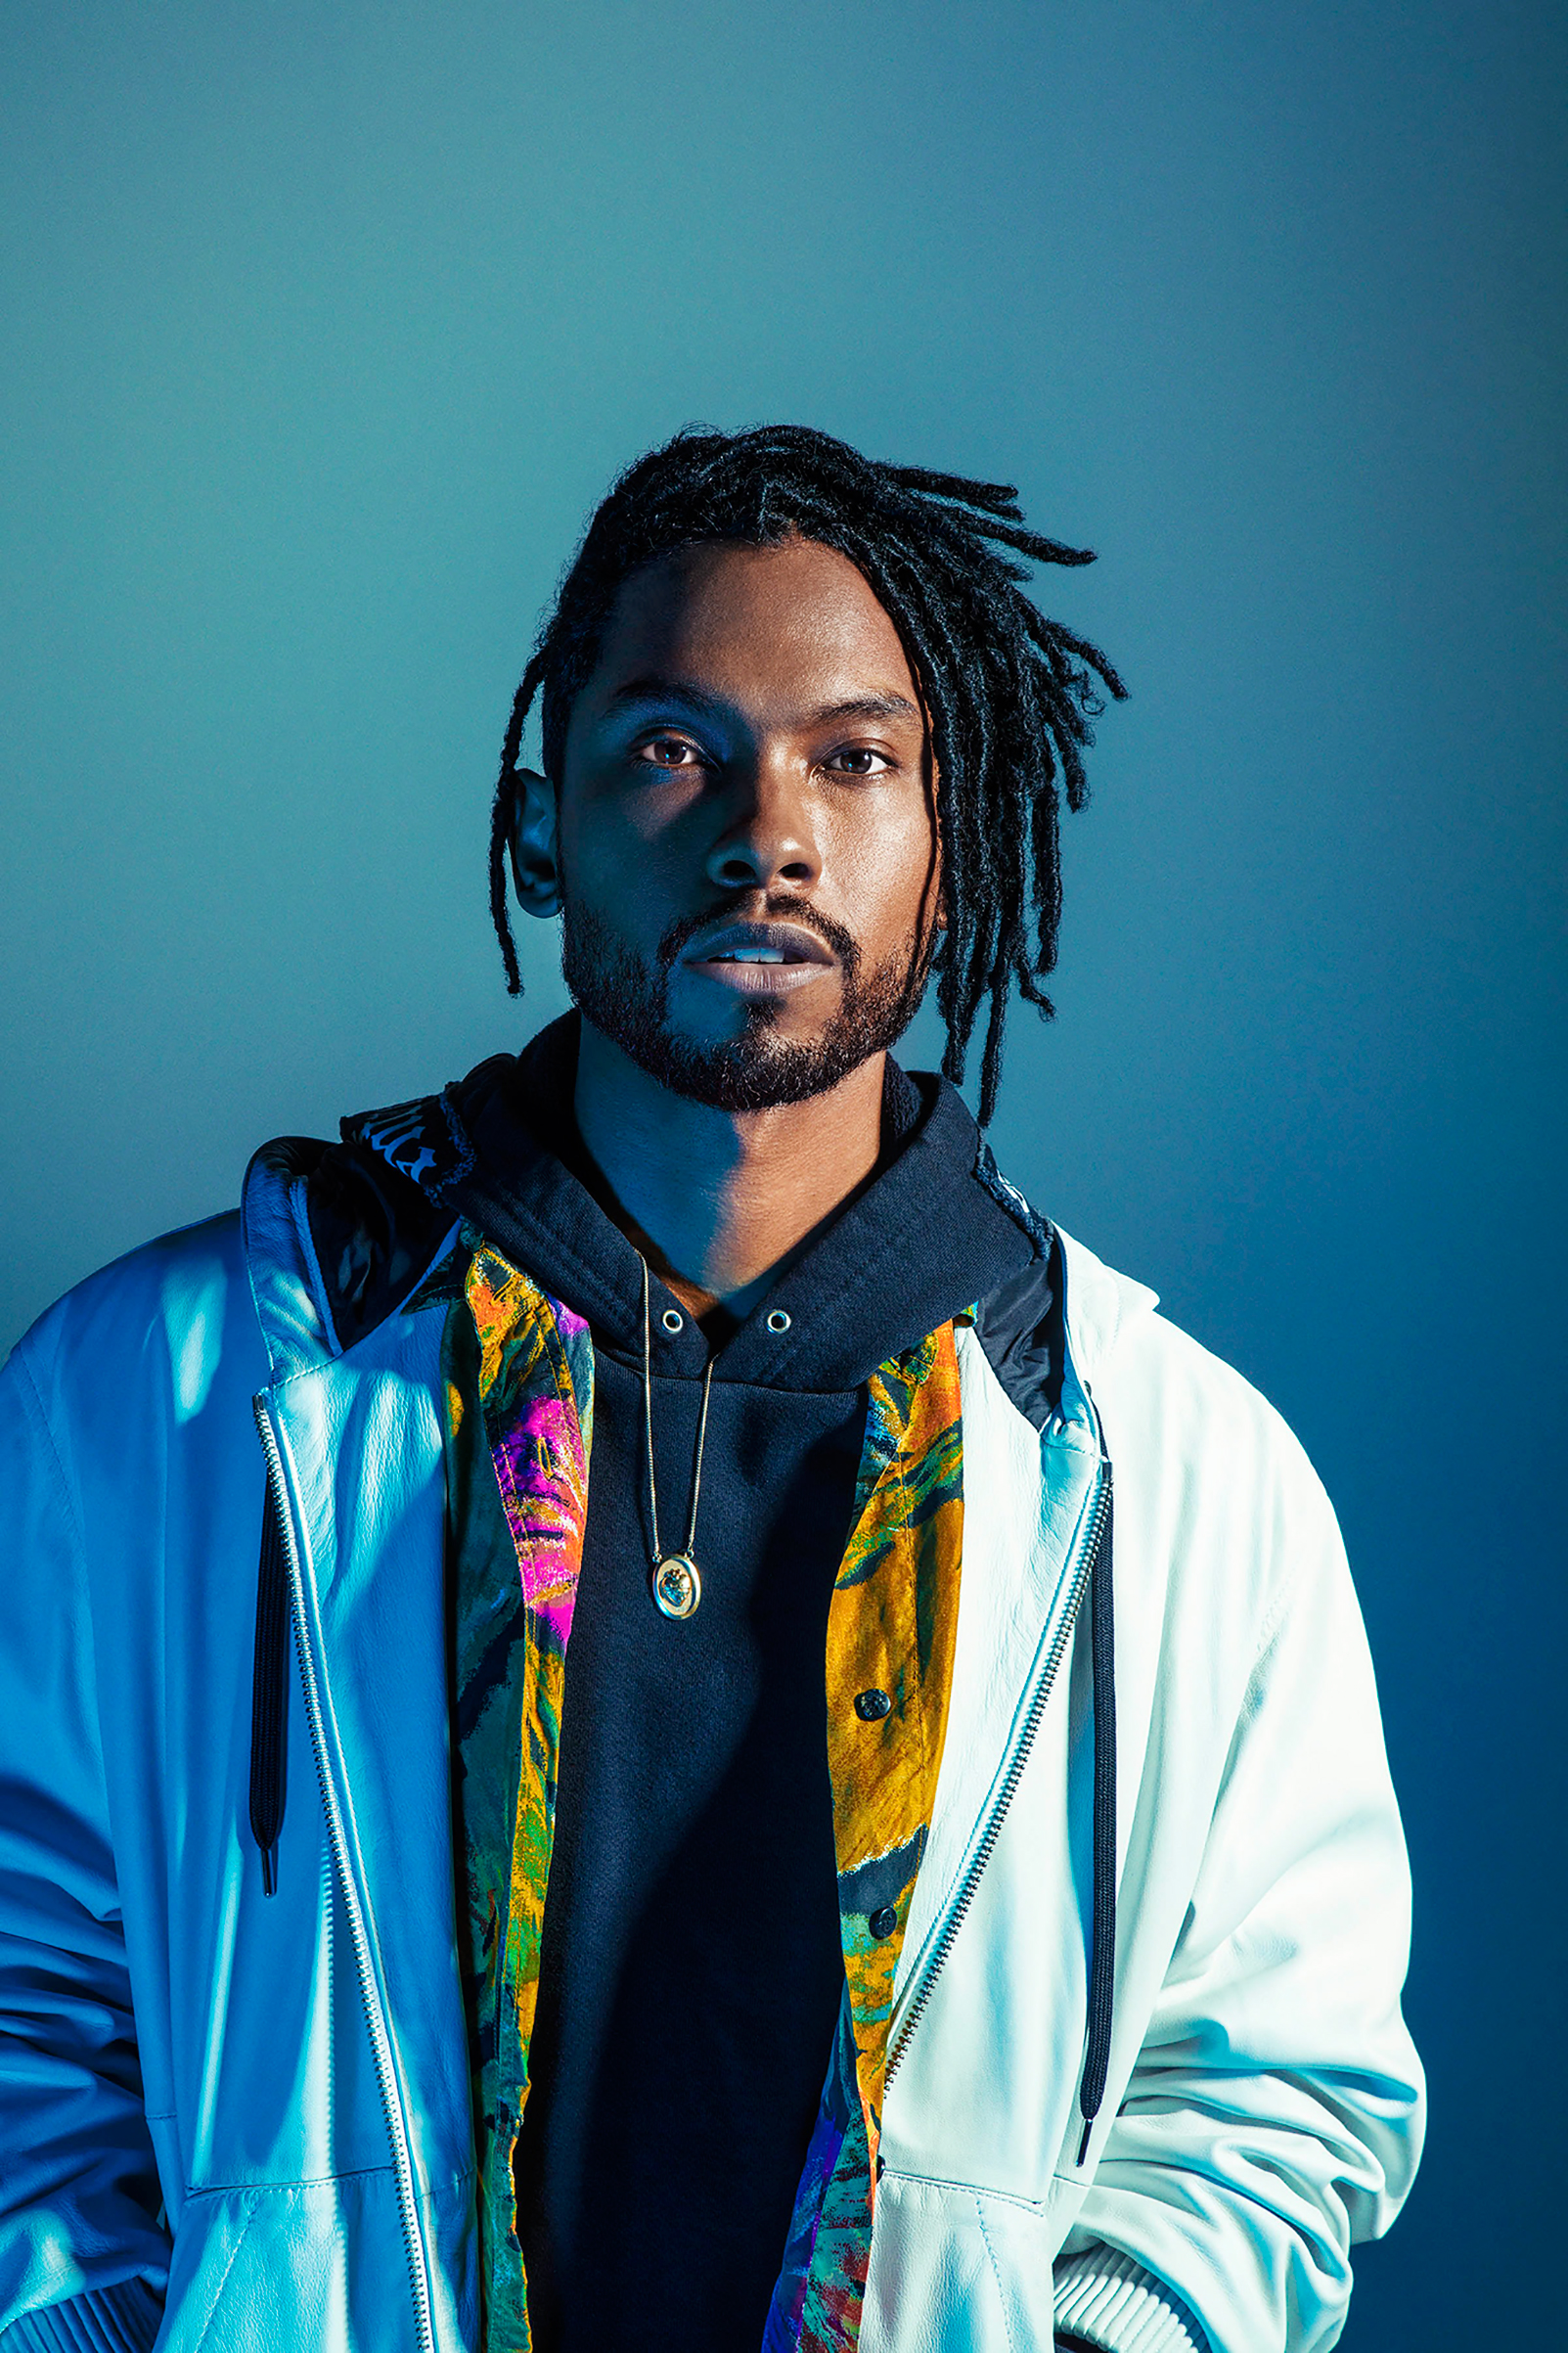 Miguel won Best R&amp;B Song at the 2013 Grammys for his erotic slow burner “Adorn” (Timothy Saccenti)